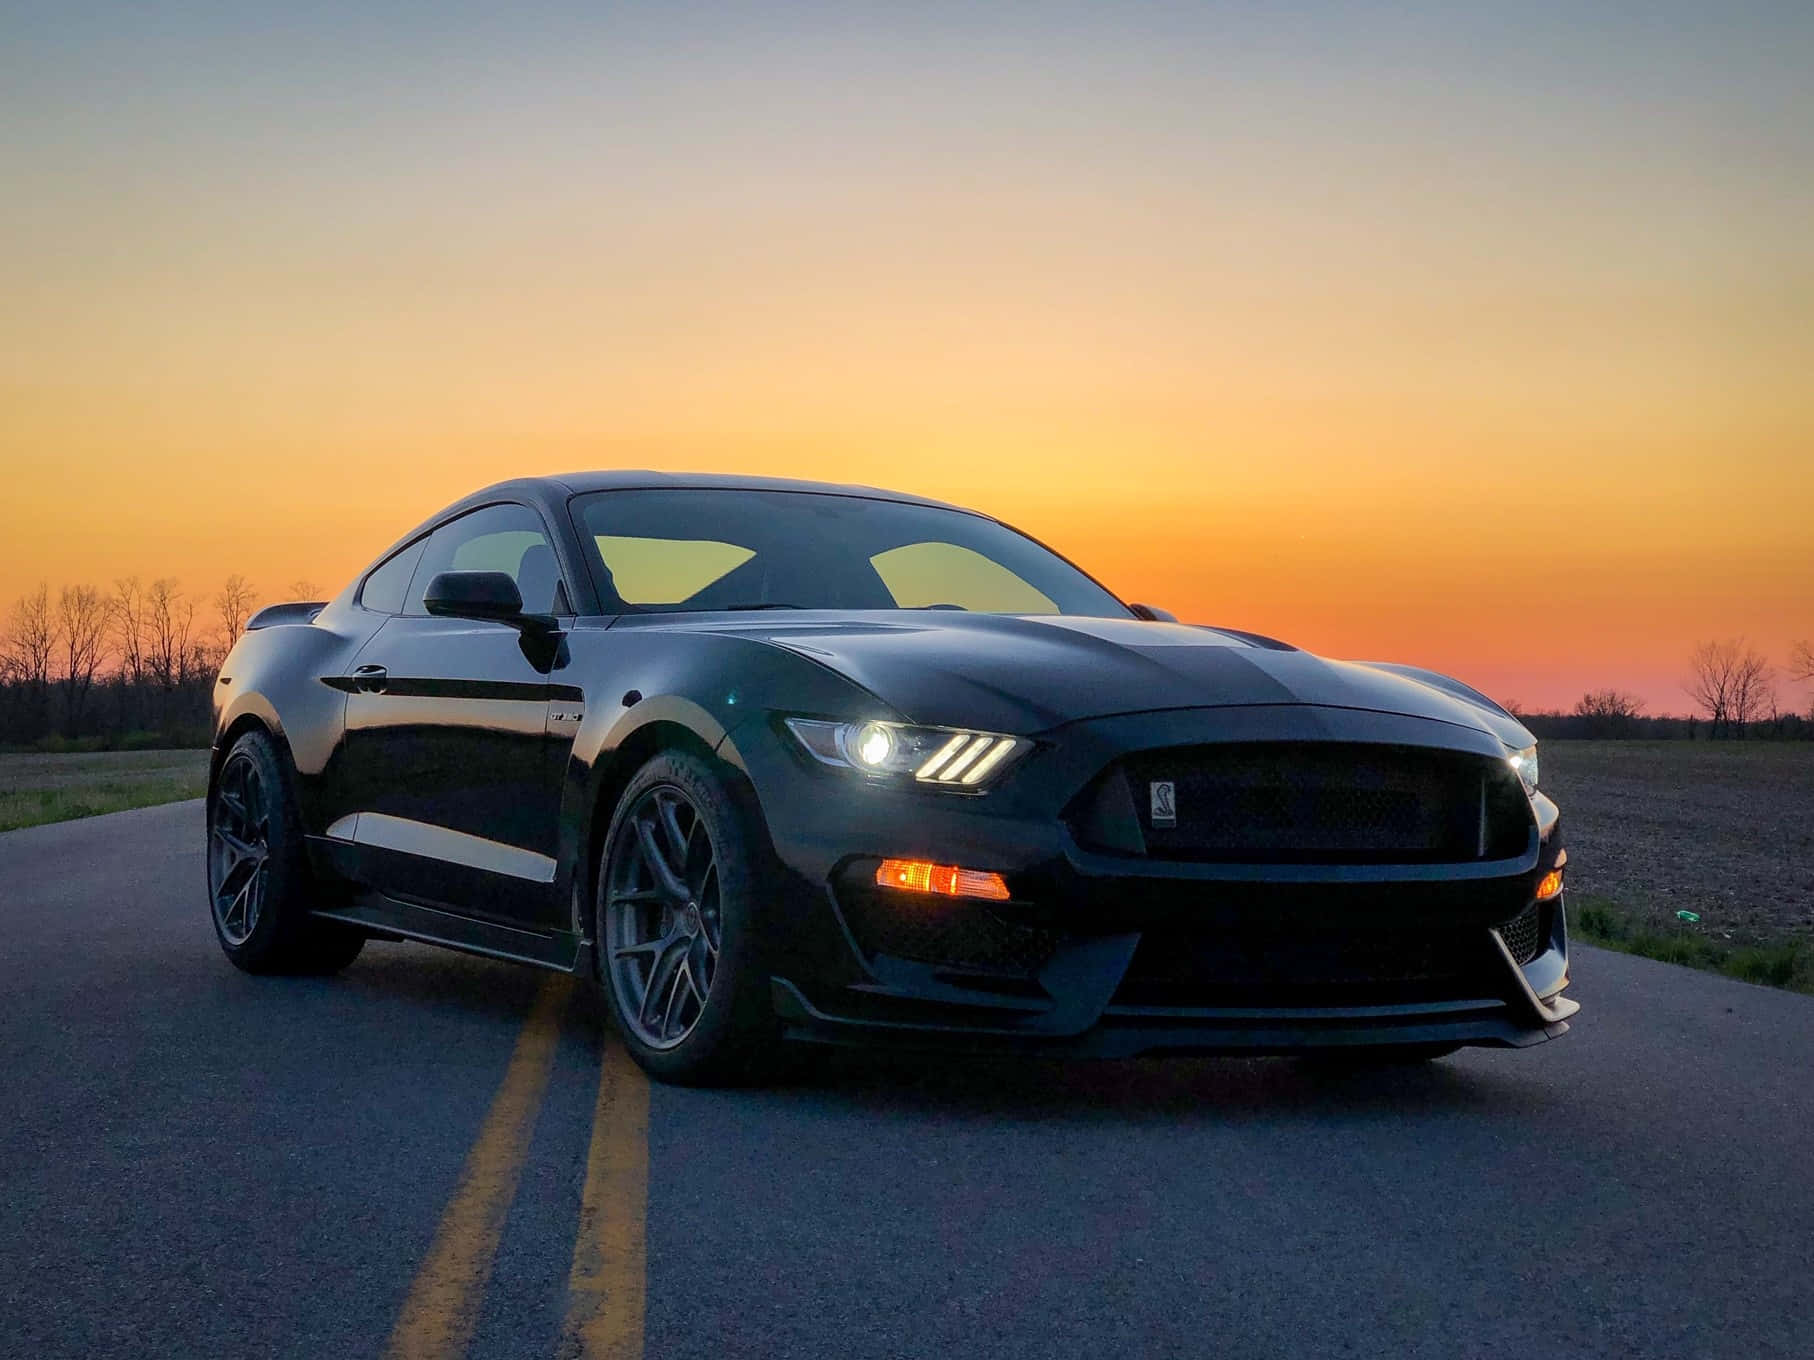 Ford Mustang GT, the ultimate muscle car